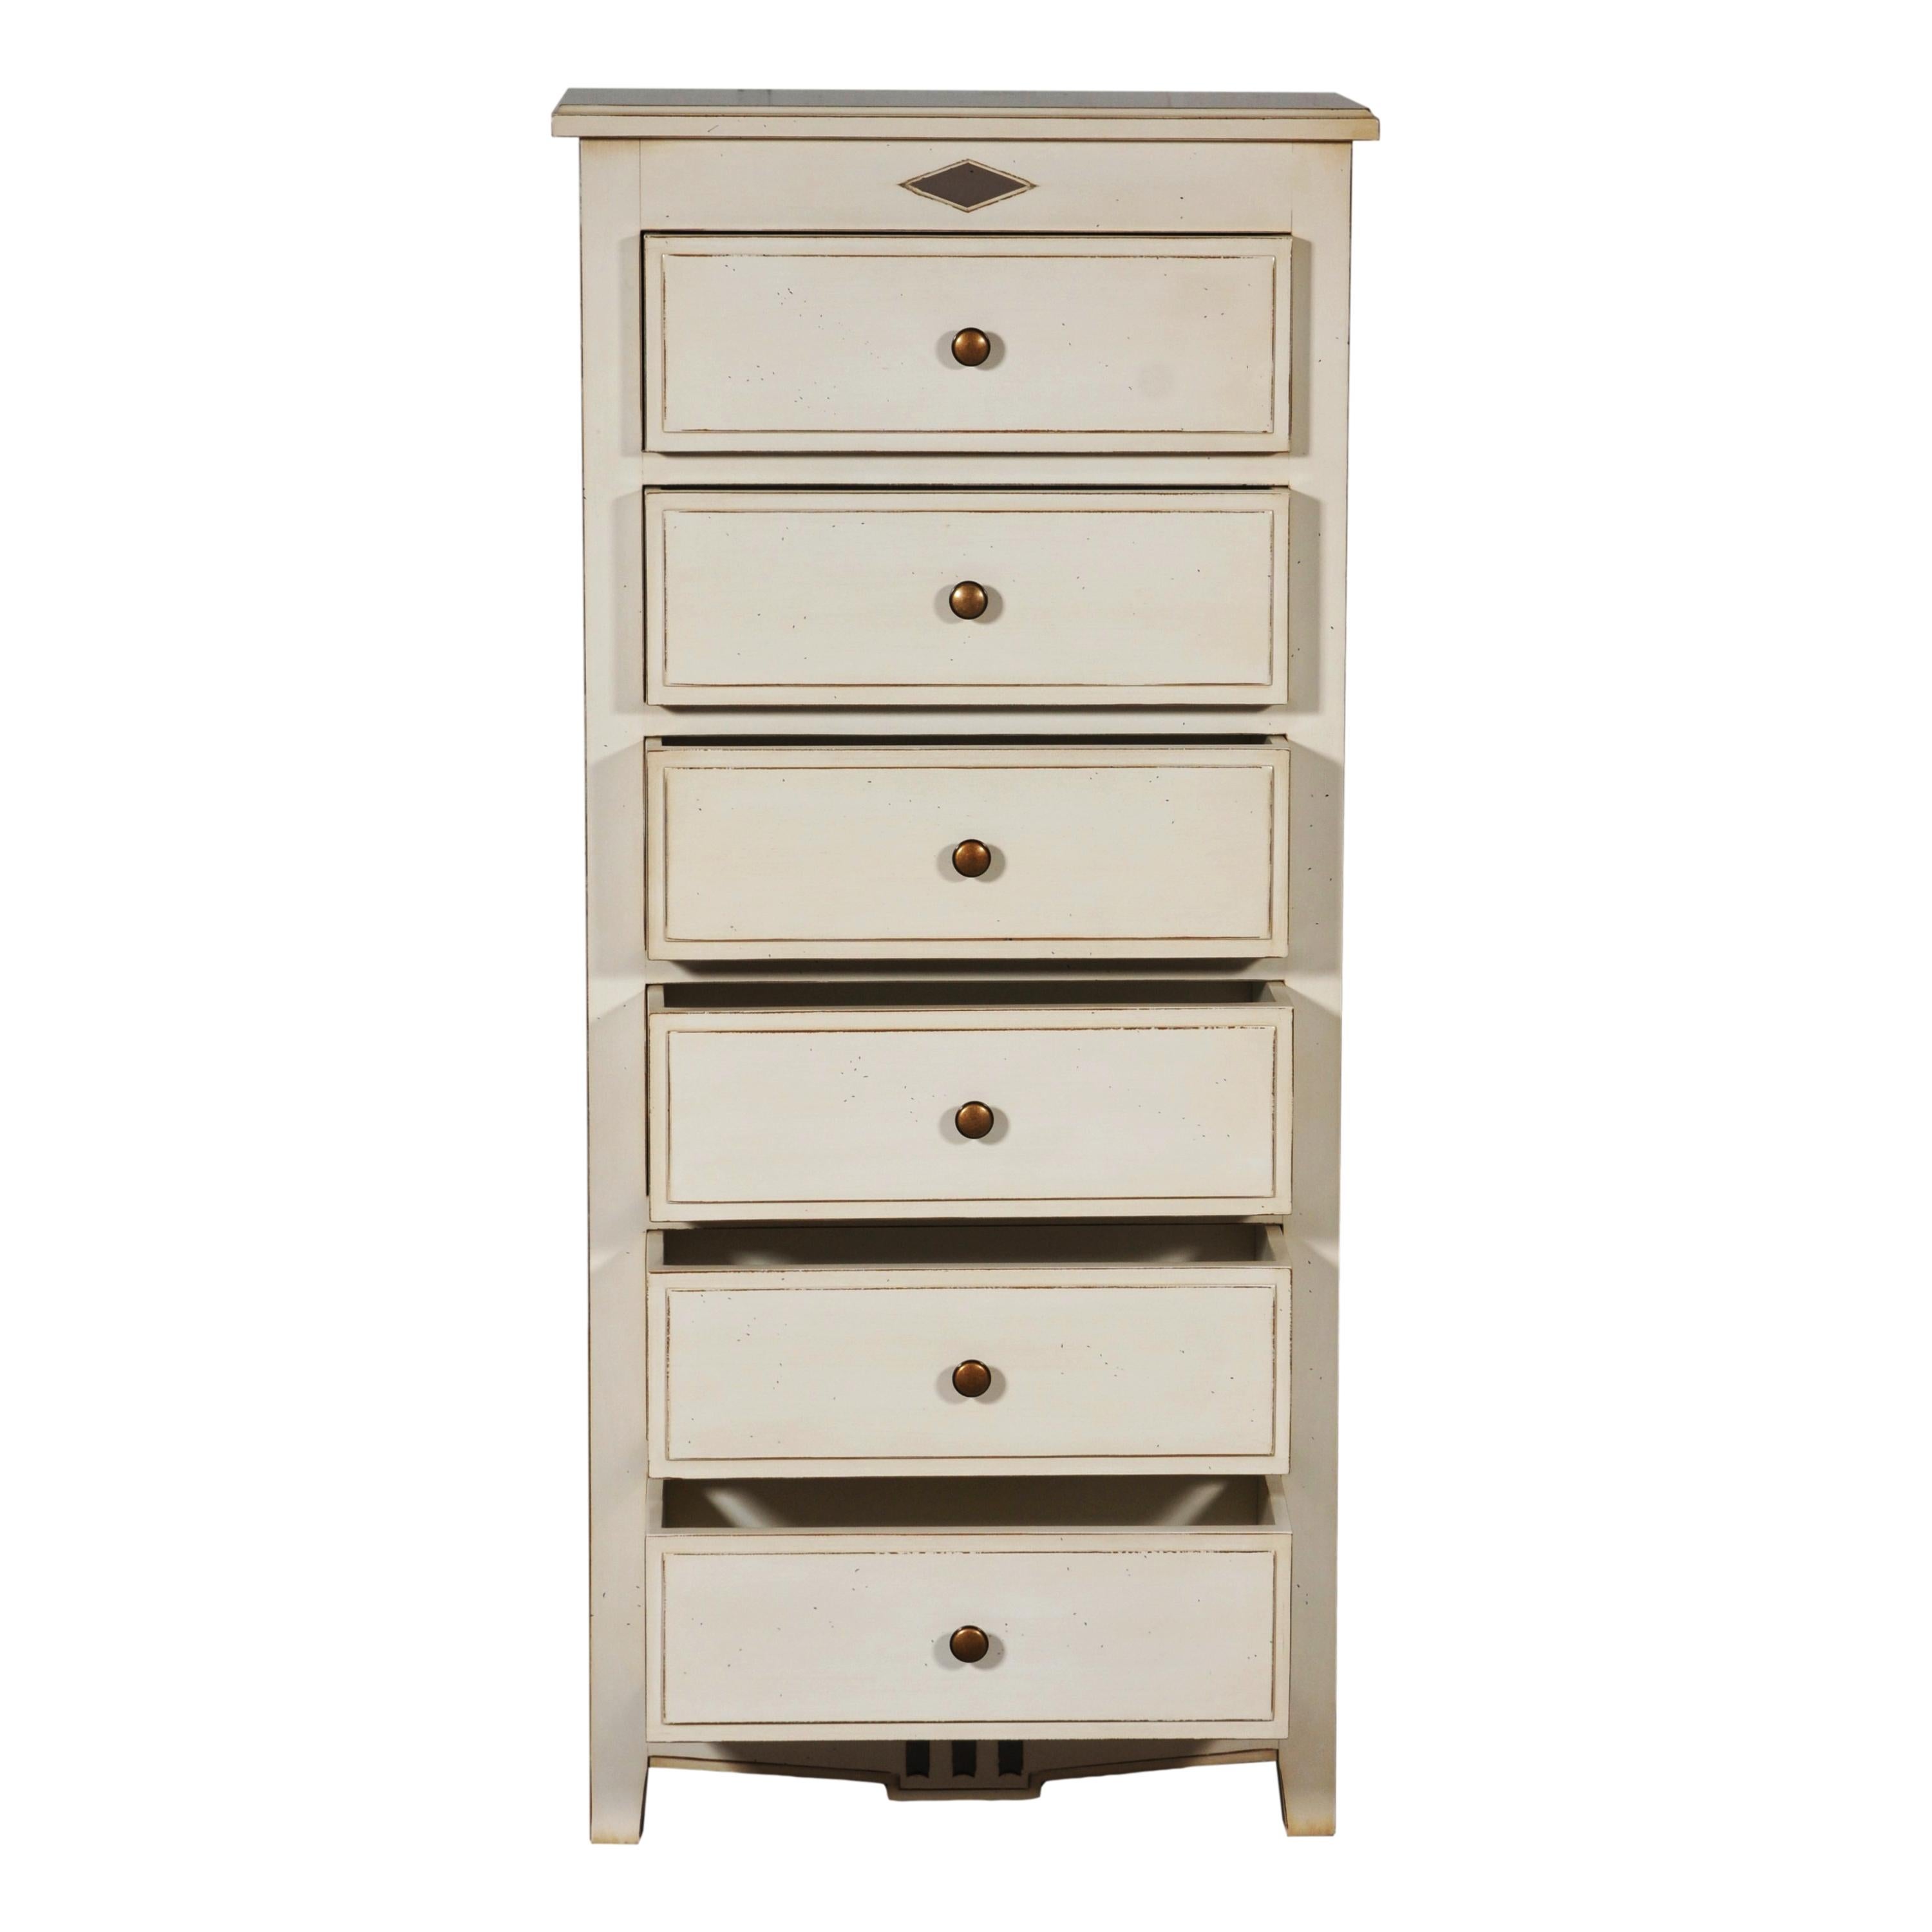 This Chiffonnier 6-drawer chest is a free hand crafted and modernized interpretation of the French Directoire Style at the end of the 18th century. This period style is remarkable with its straight, classical and timeless lines with diamonds or